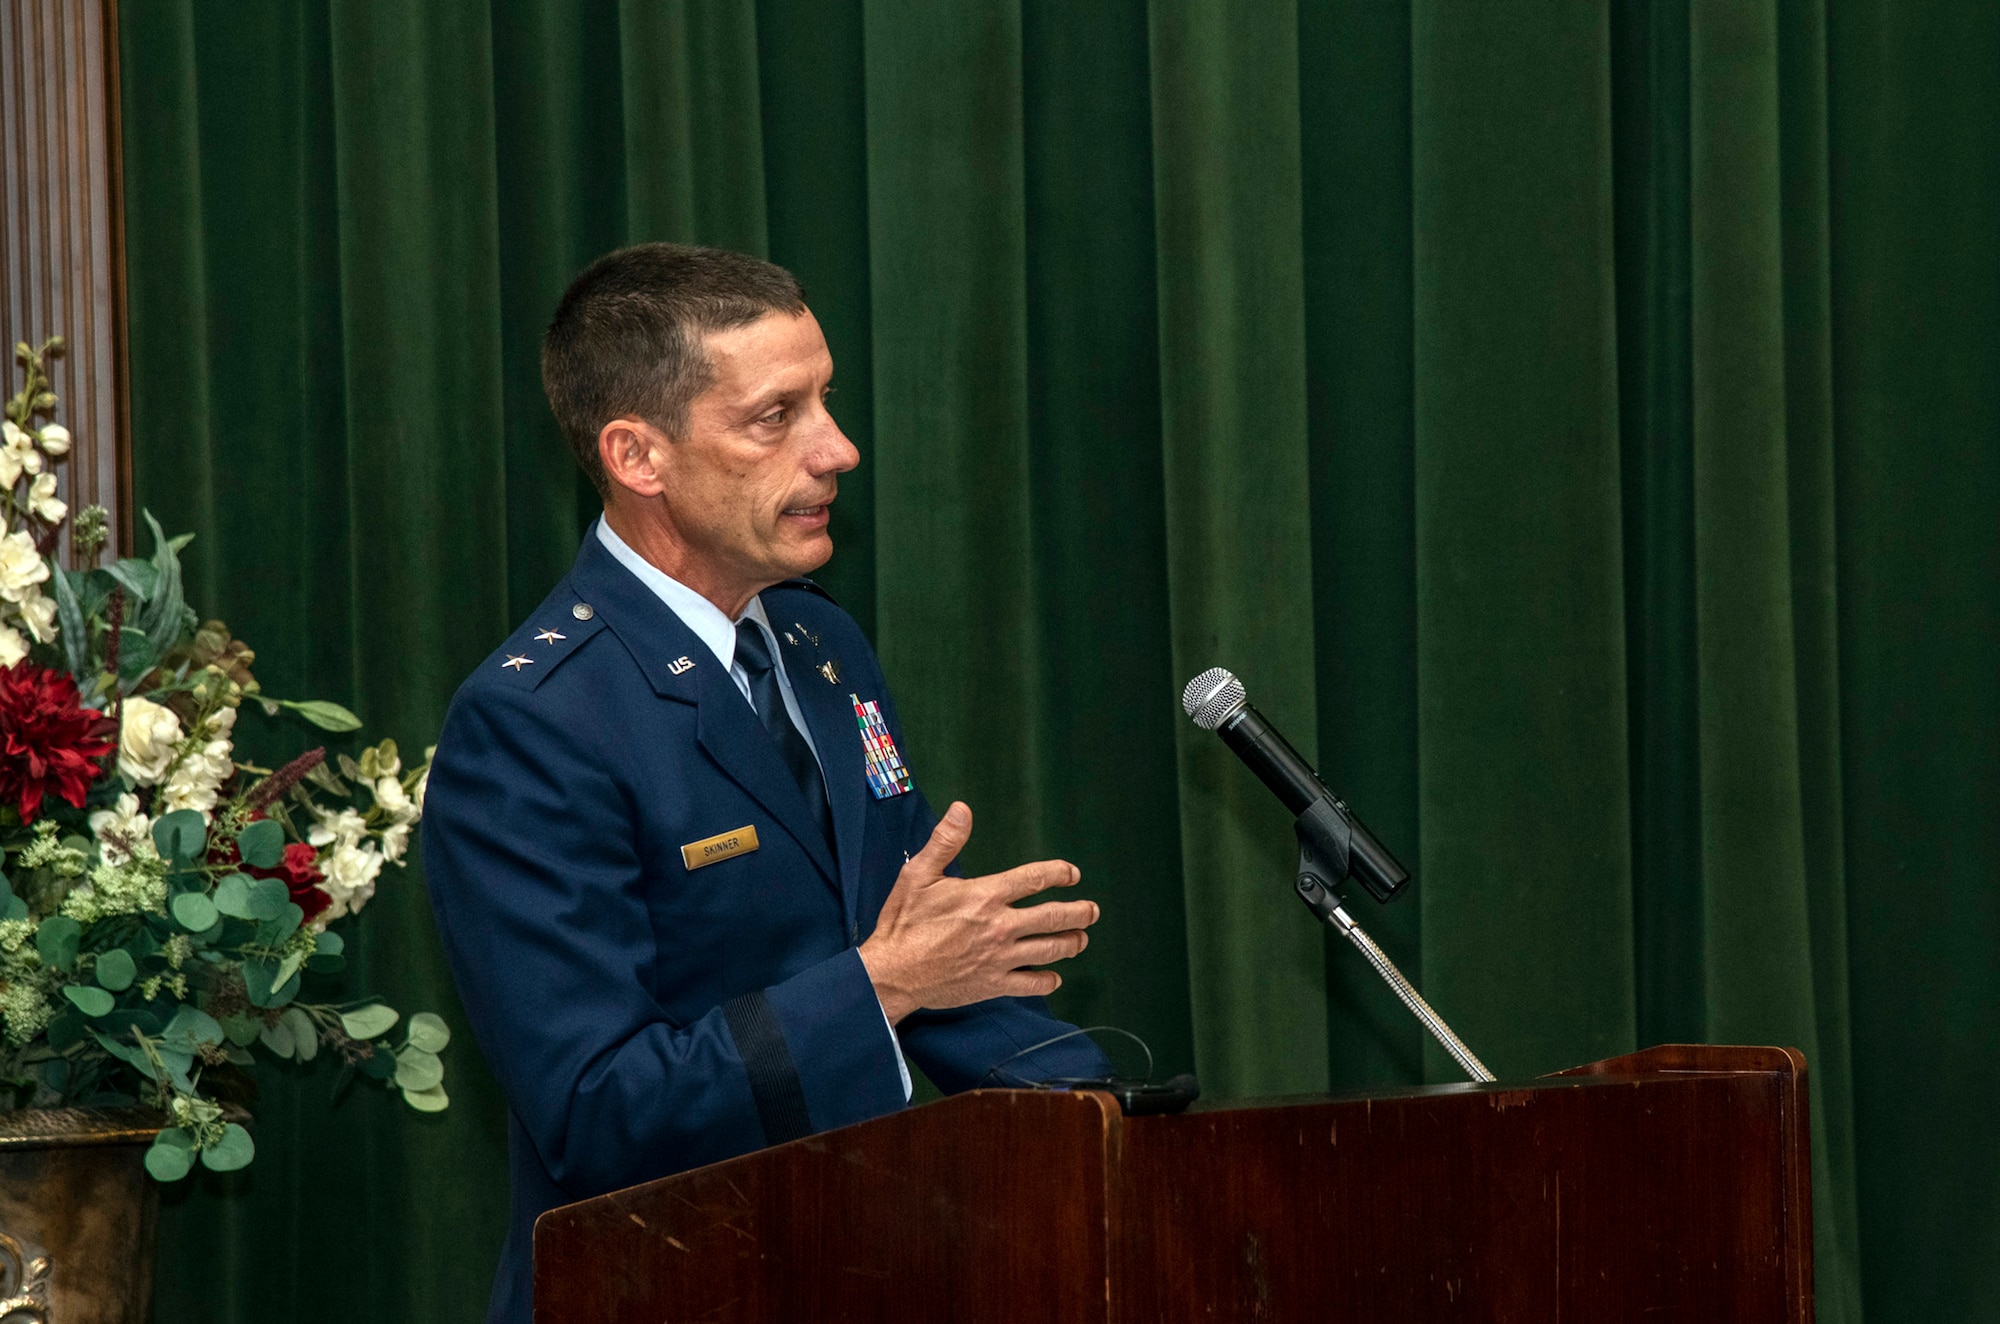 Maj. Gen. Robert Skinner, 24th Air Force commander, addresses attendees during the 688th Cyberspace Wing change of command ceremony at Joint Base San Antonio-Lackland, Texas, on June 25, 2019. Col. Steven Anderson took command of the 688th CW during the ceremony. (U.S. Air Force photo by Johnny Saldivar)